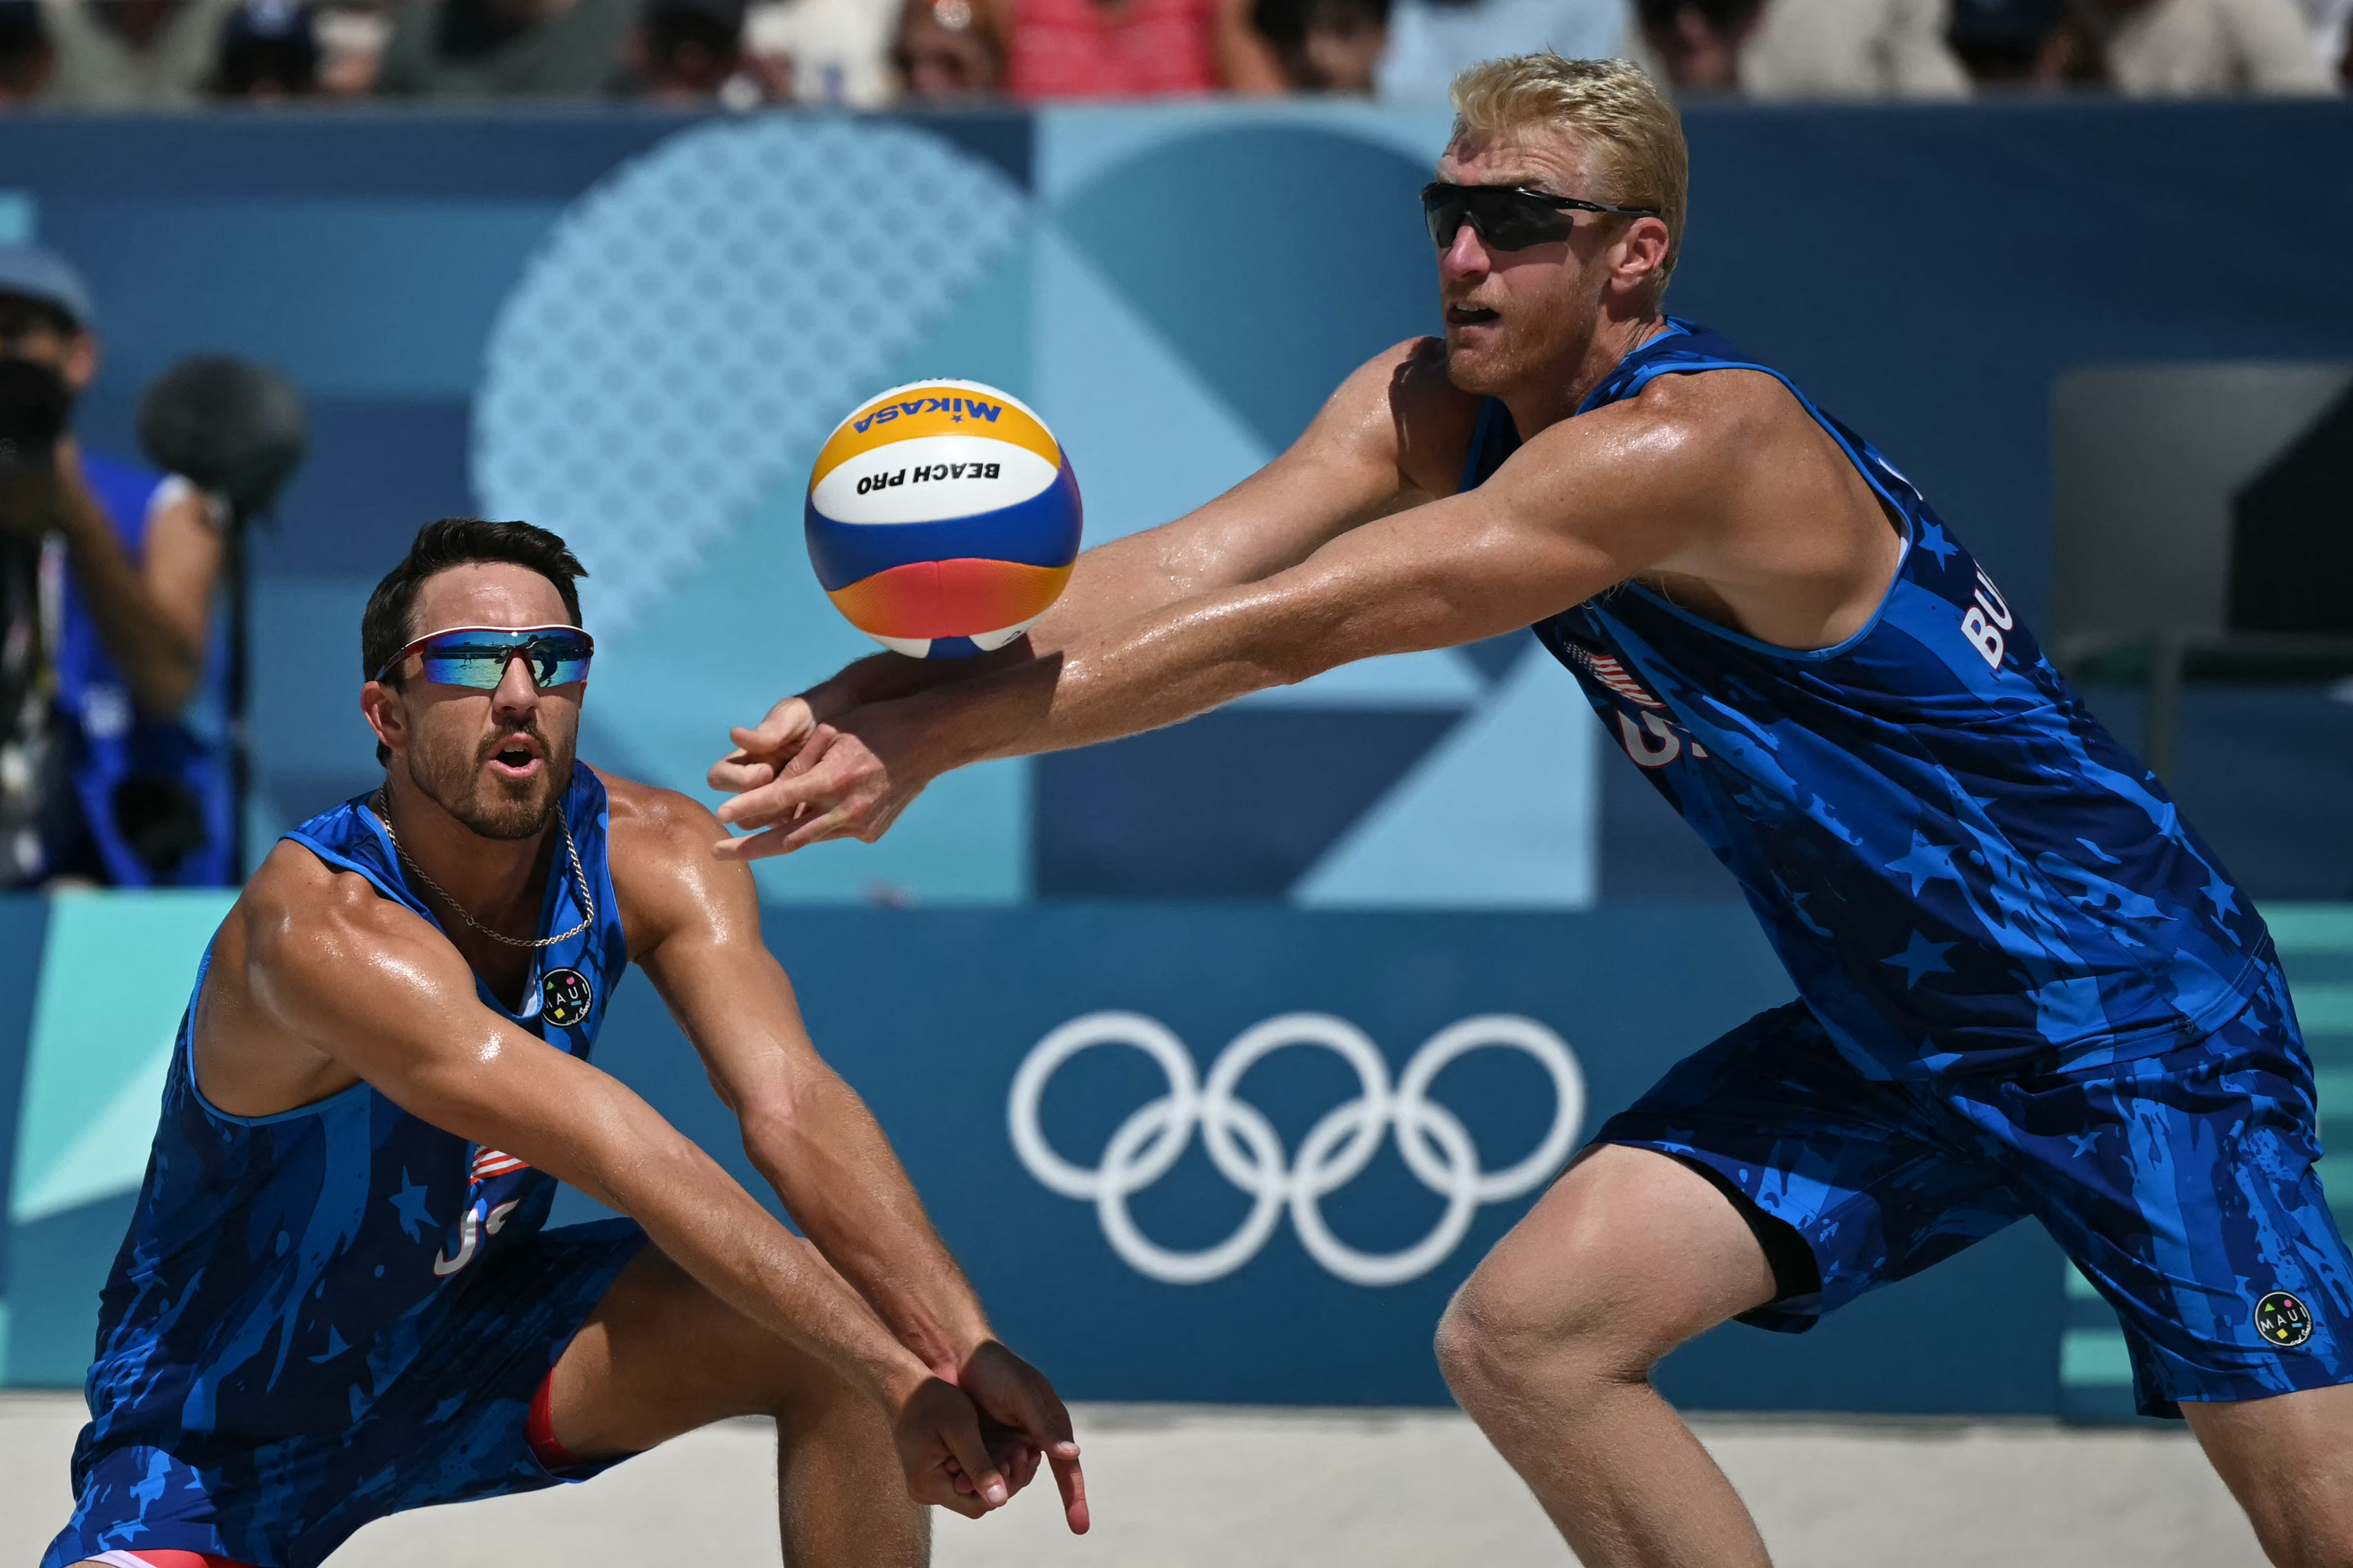 Budinger and Evans fall to defending gold medalists in beach volleyball round of 16